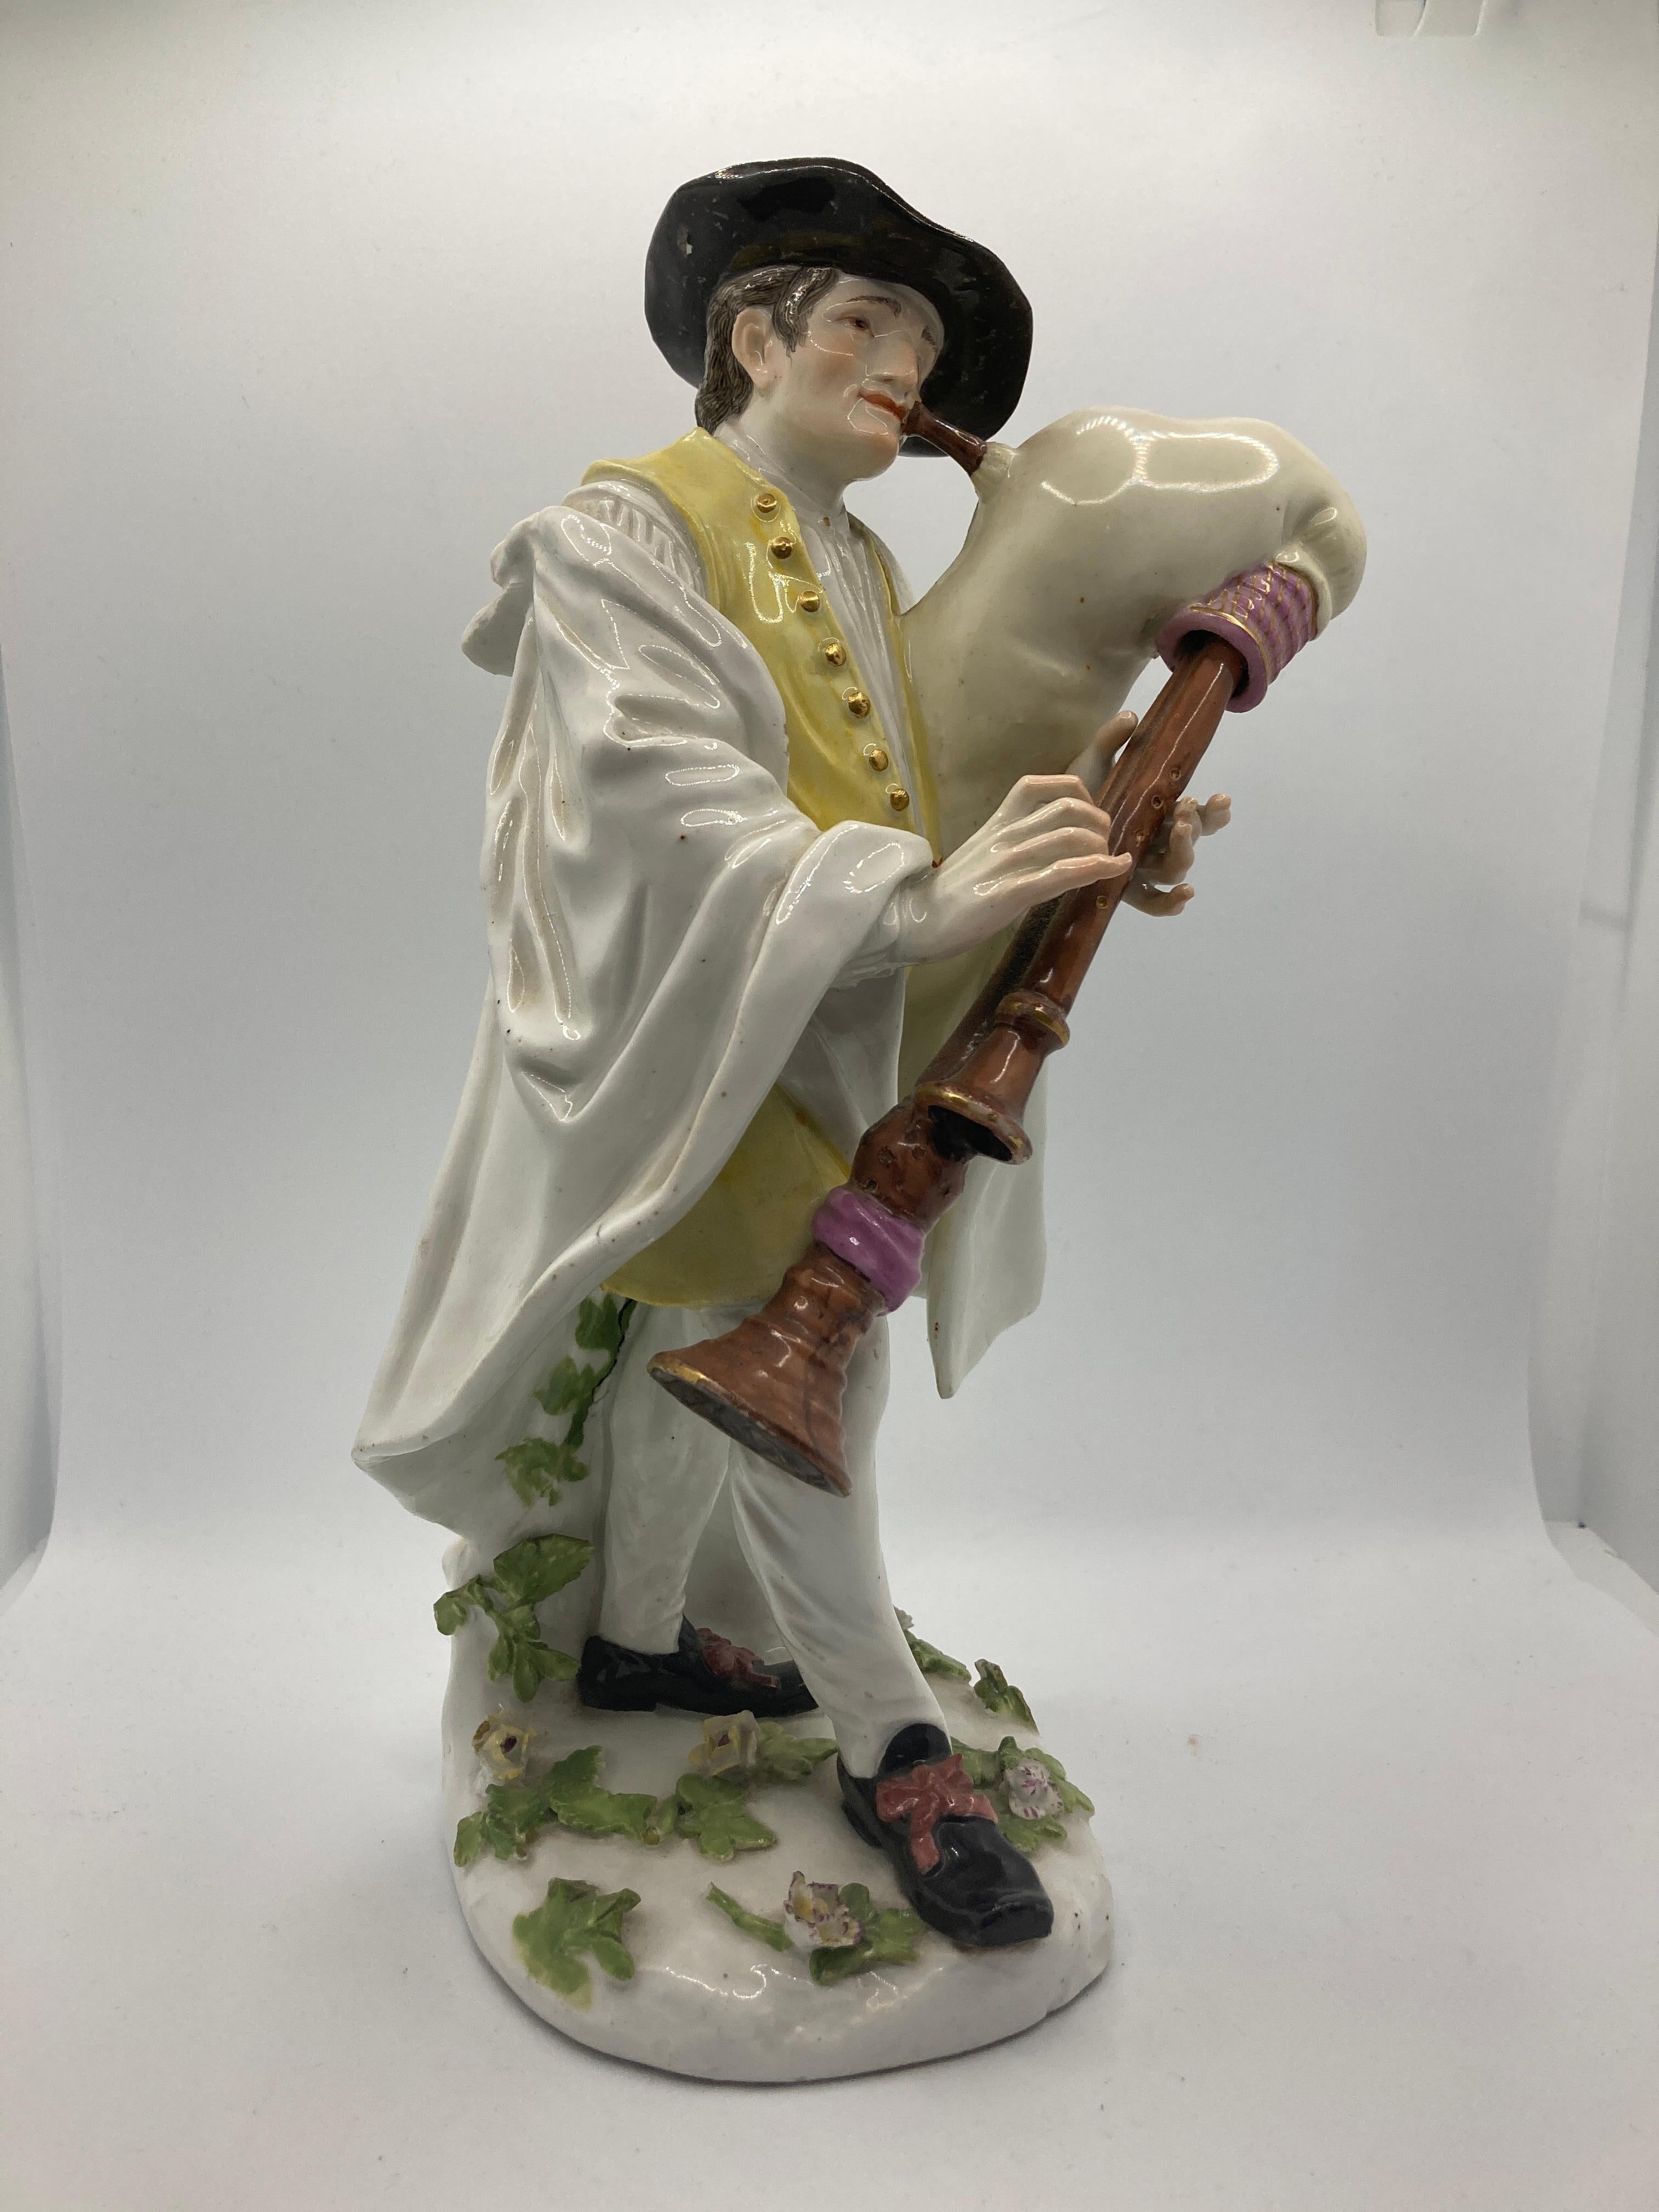 18th Century Meissen Porcelain Figure, Piedmontese bagpiper.  

Modelled by J.J. Kändler after an engraving by Jacques Dumont, wearing a black hat with brown feather, fur-lined white cape, yellow waistcoat with Sgraffito scrolls and circles and